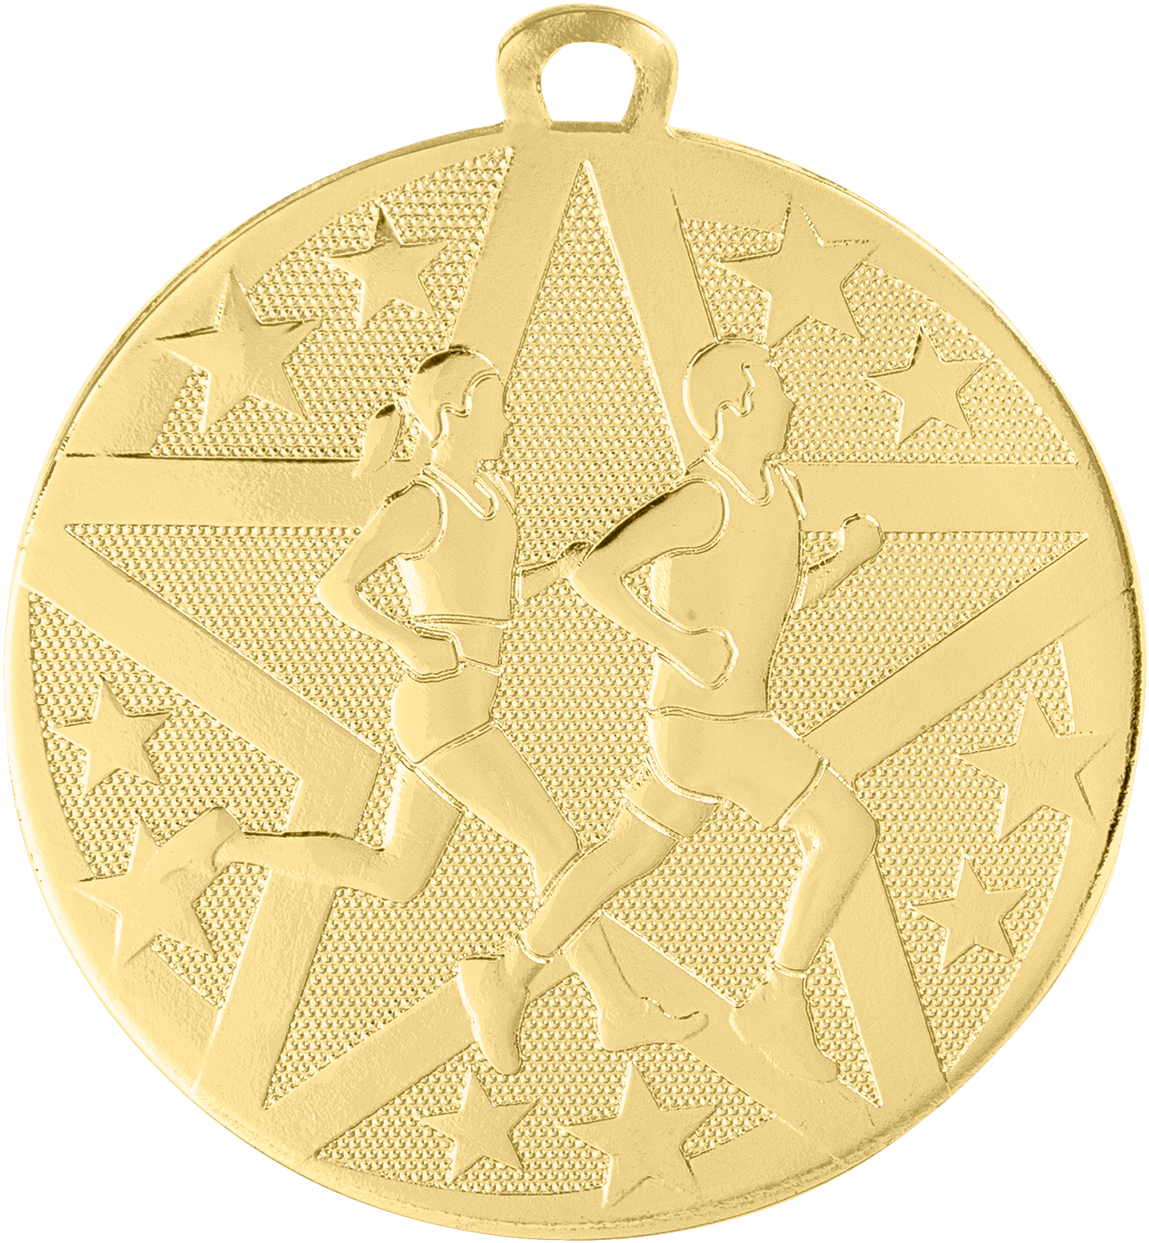 A Gold Medal With A Couple Of People Running